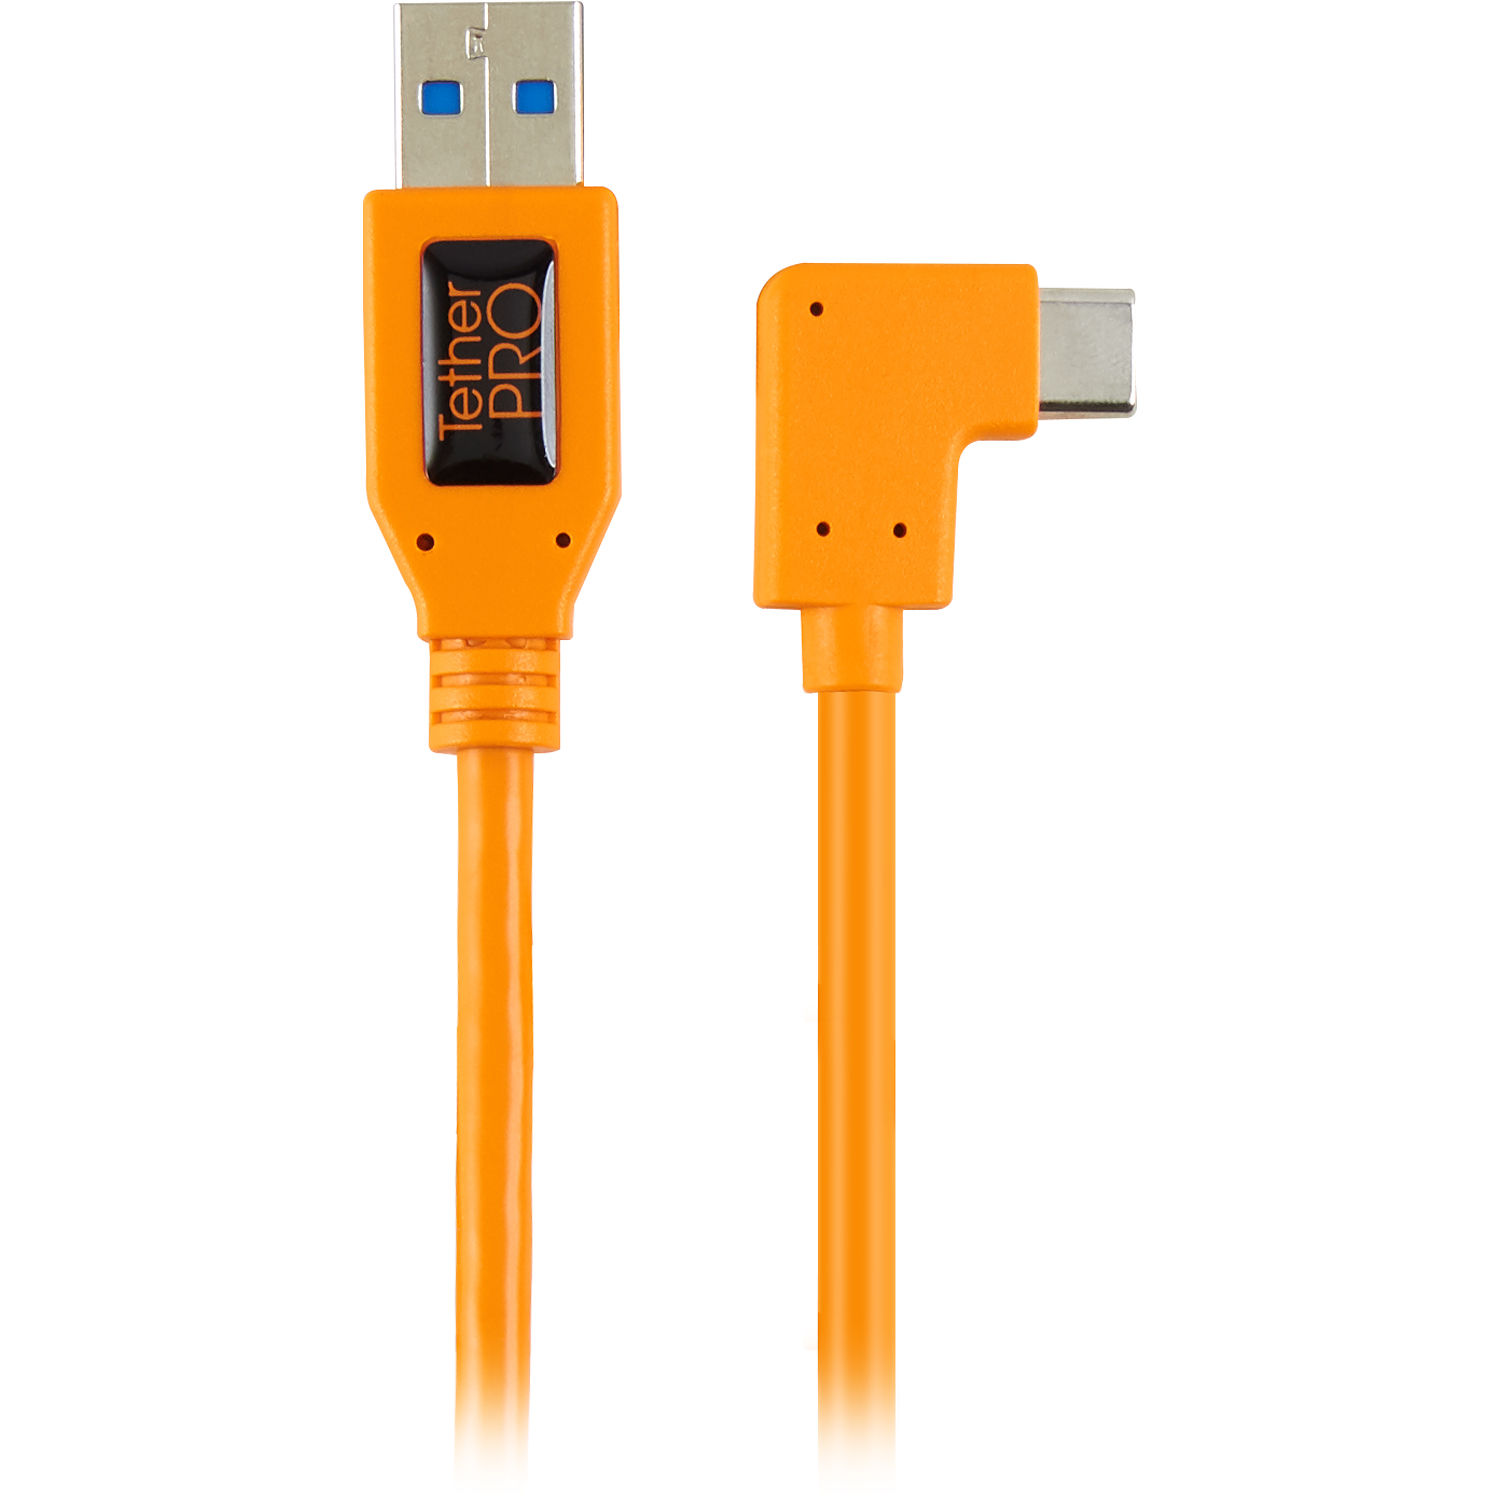 Tether Tools 20" TetherPro USB 3.0 Type-A to C Right Angle Adapter Cable (High-Visibilty Orange)